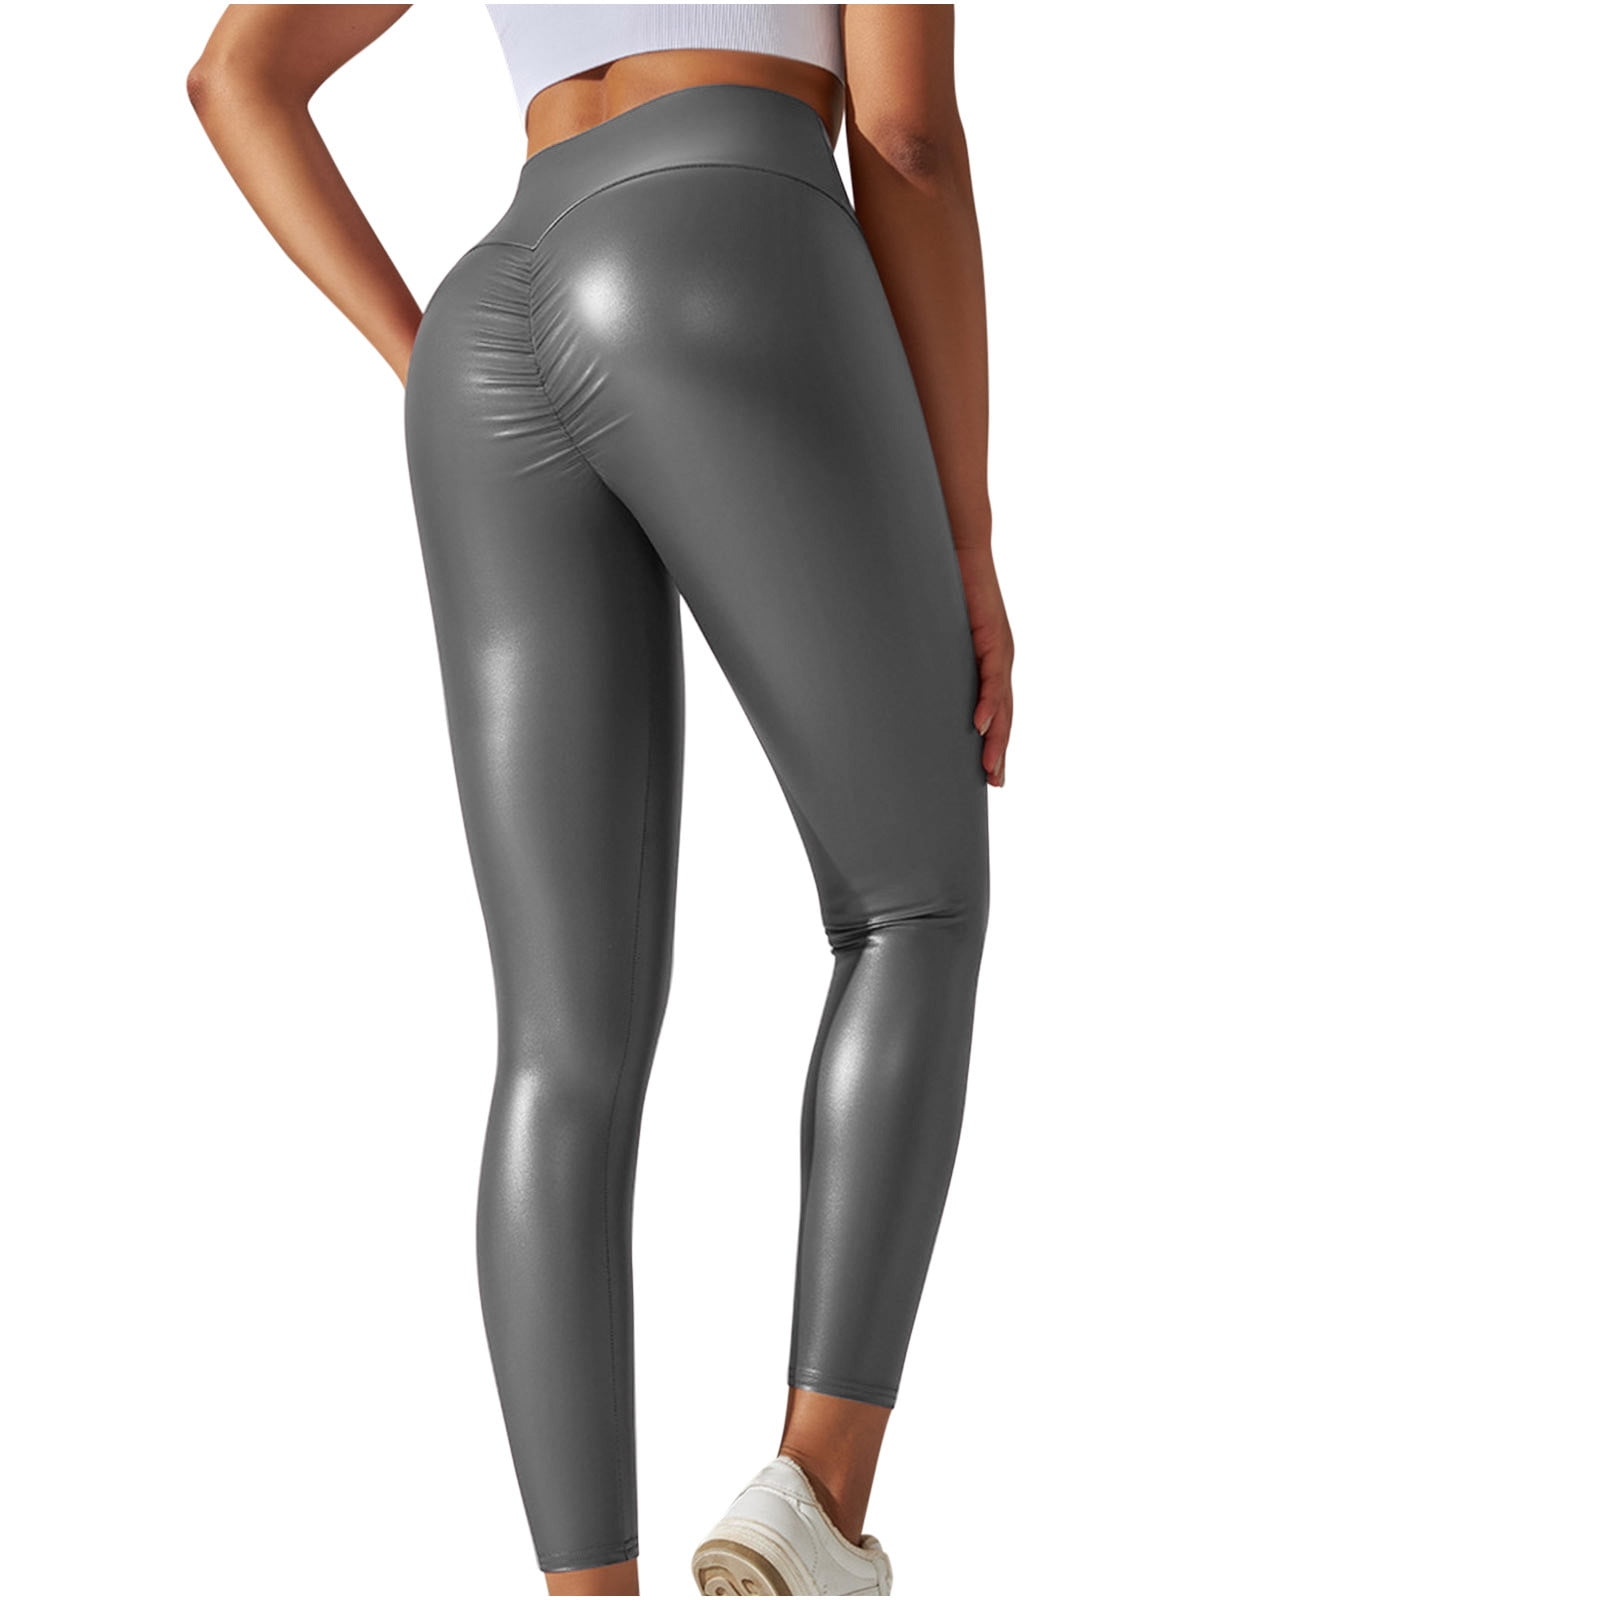 Yogaworld Matte Leather Yoga Lyra Leggings Price For Women Slim Fit, Hip  Shaping, High Waist, Autumn/Winter Fitness Pants For Running, Fitness, And  Jogging From Apparel8296, $14.49